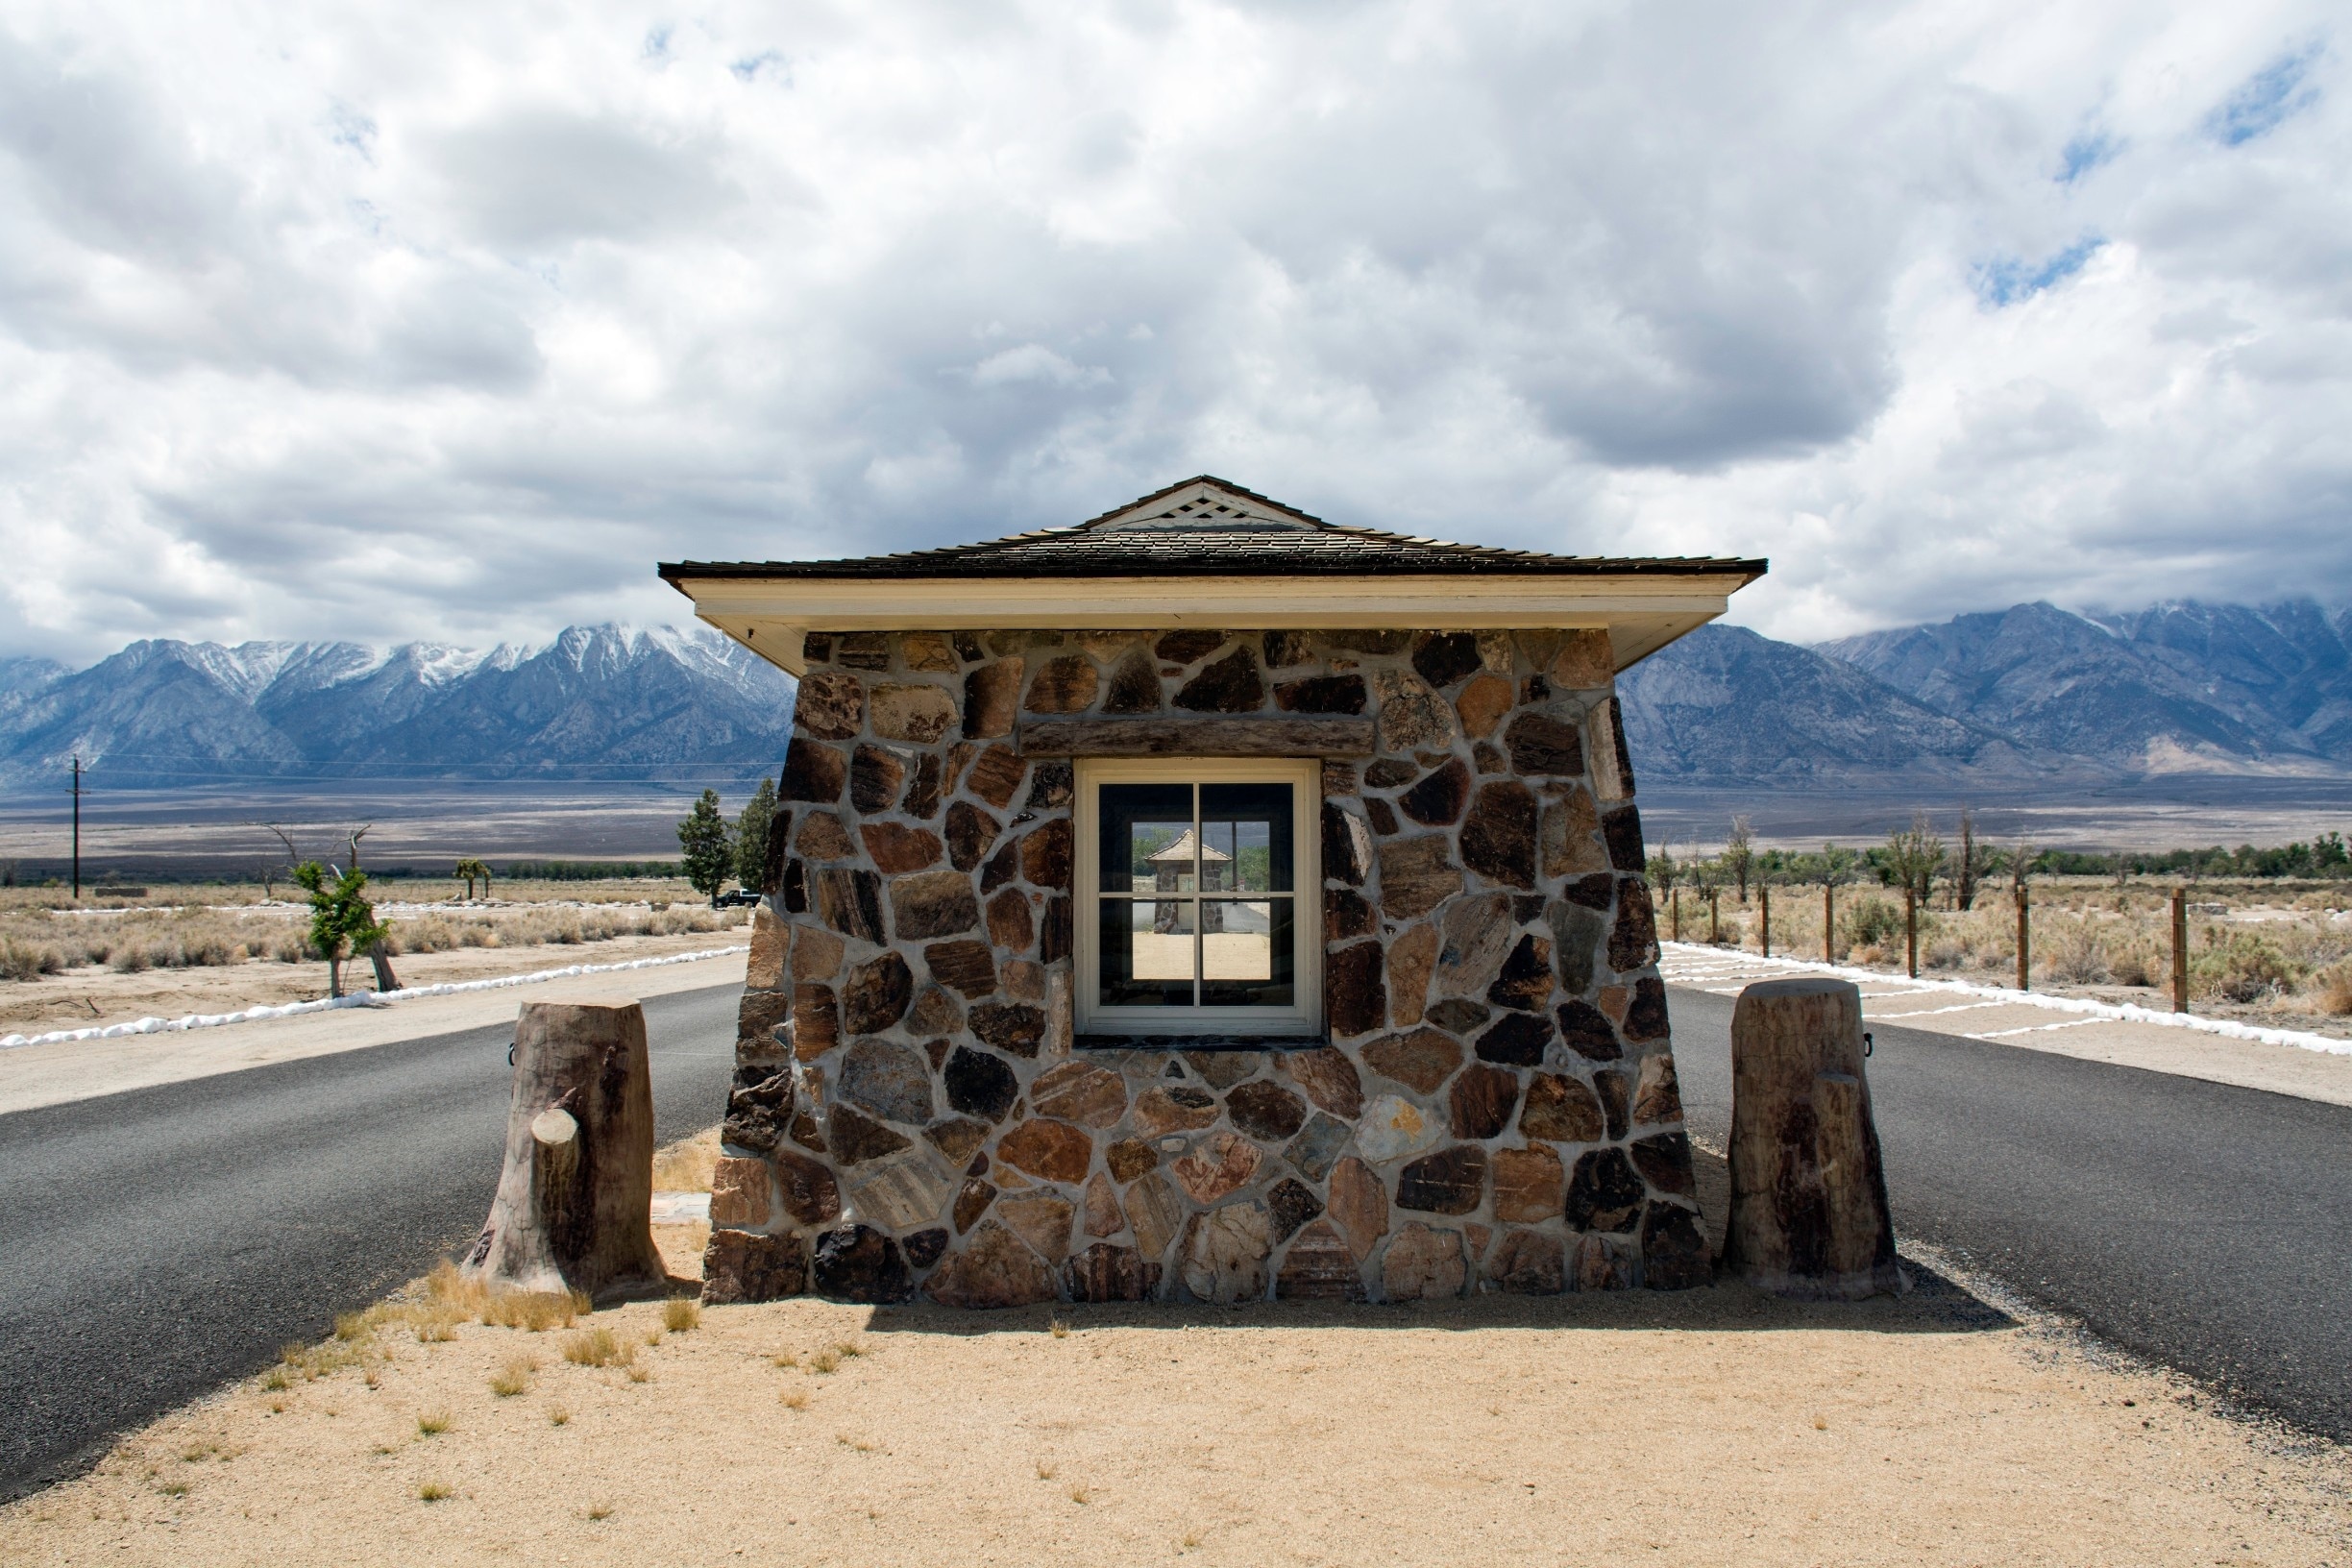 Gatehouse at Manzanar, most famous of the ten concentration camps, or "relocation centers" built to house Japanese-Americans and Japanese aliens during the Second World War. Nearly 120,000 people, two-thirds of them U.S. citizens, were removed from their homes, primarily on the west coast, to the camps inland. When I was a kid, riding up U.S. 395 to a camping or hiking trip in the Sierras, these gatehouses were the most visible parts of what remained of the camp. Manzanar has since become a National Historic Site, with an interpretive center housed in the camp's former auditorium and reconstructed barracks with exhibits documenting the lives of the internees.